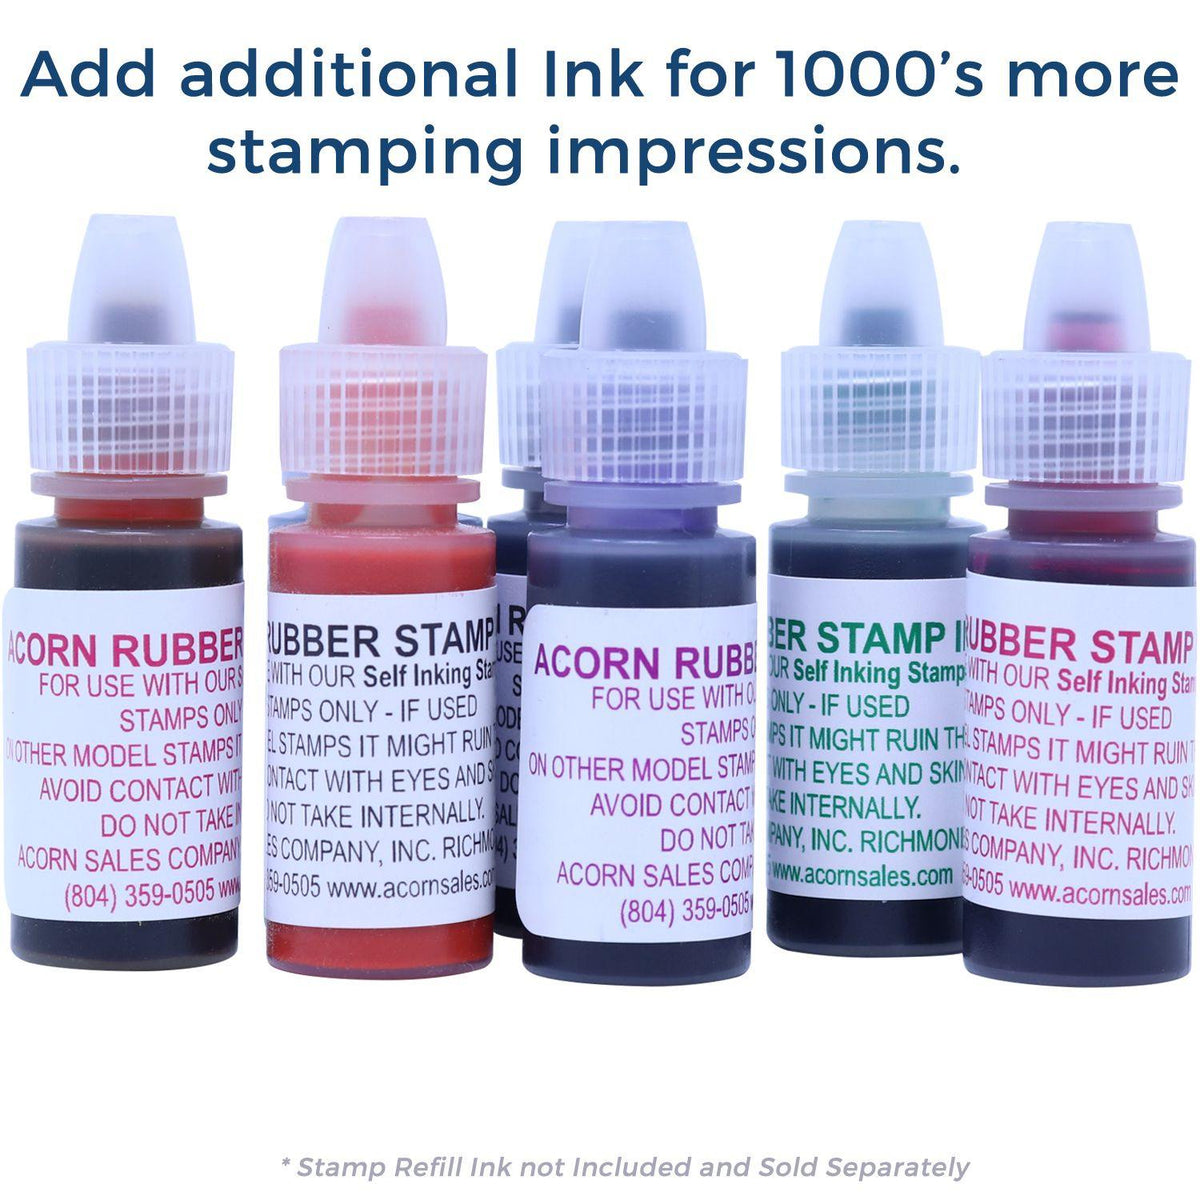 Refill Inks for Large Pre-Inked Extra Credit Stamp Available